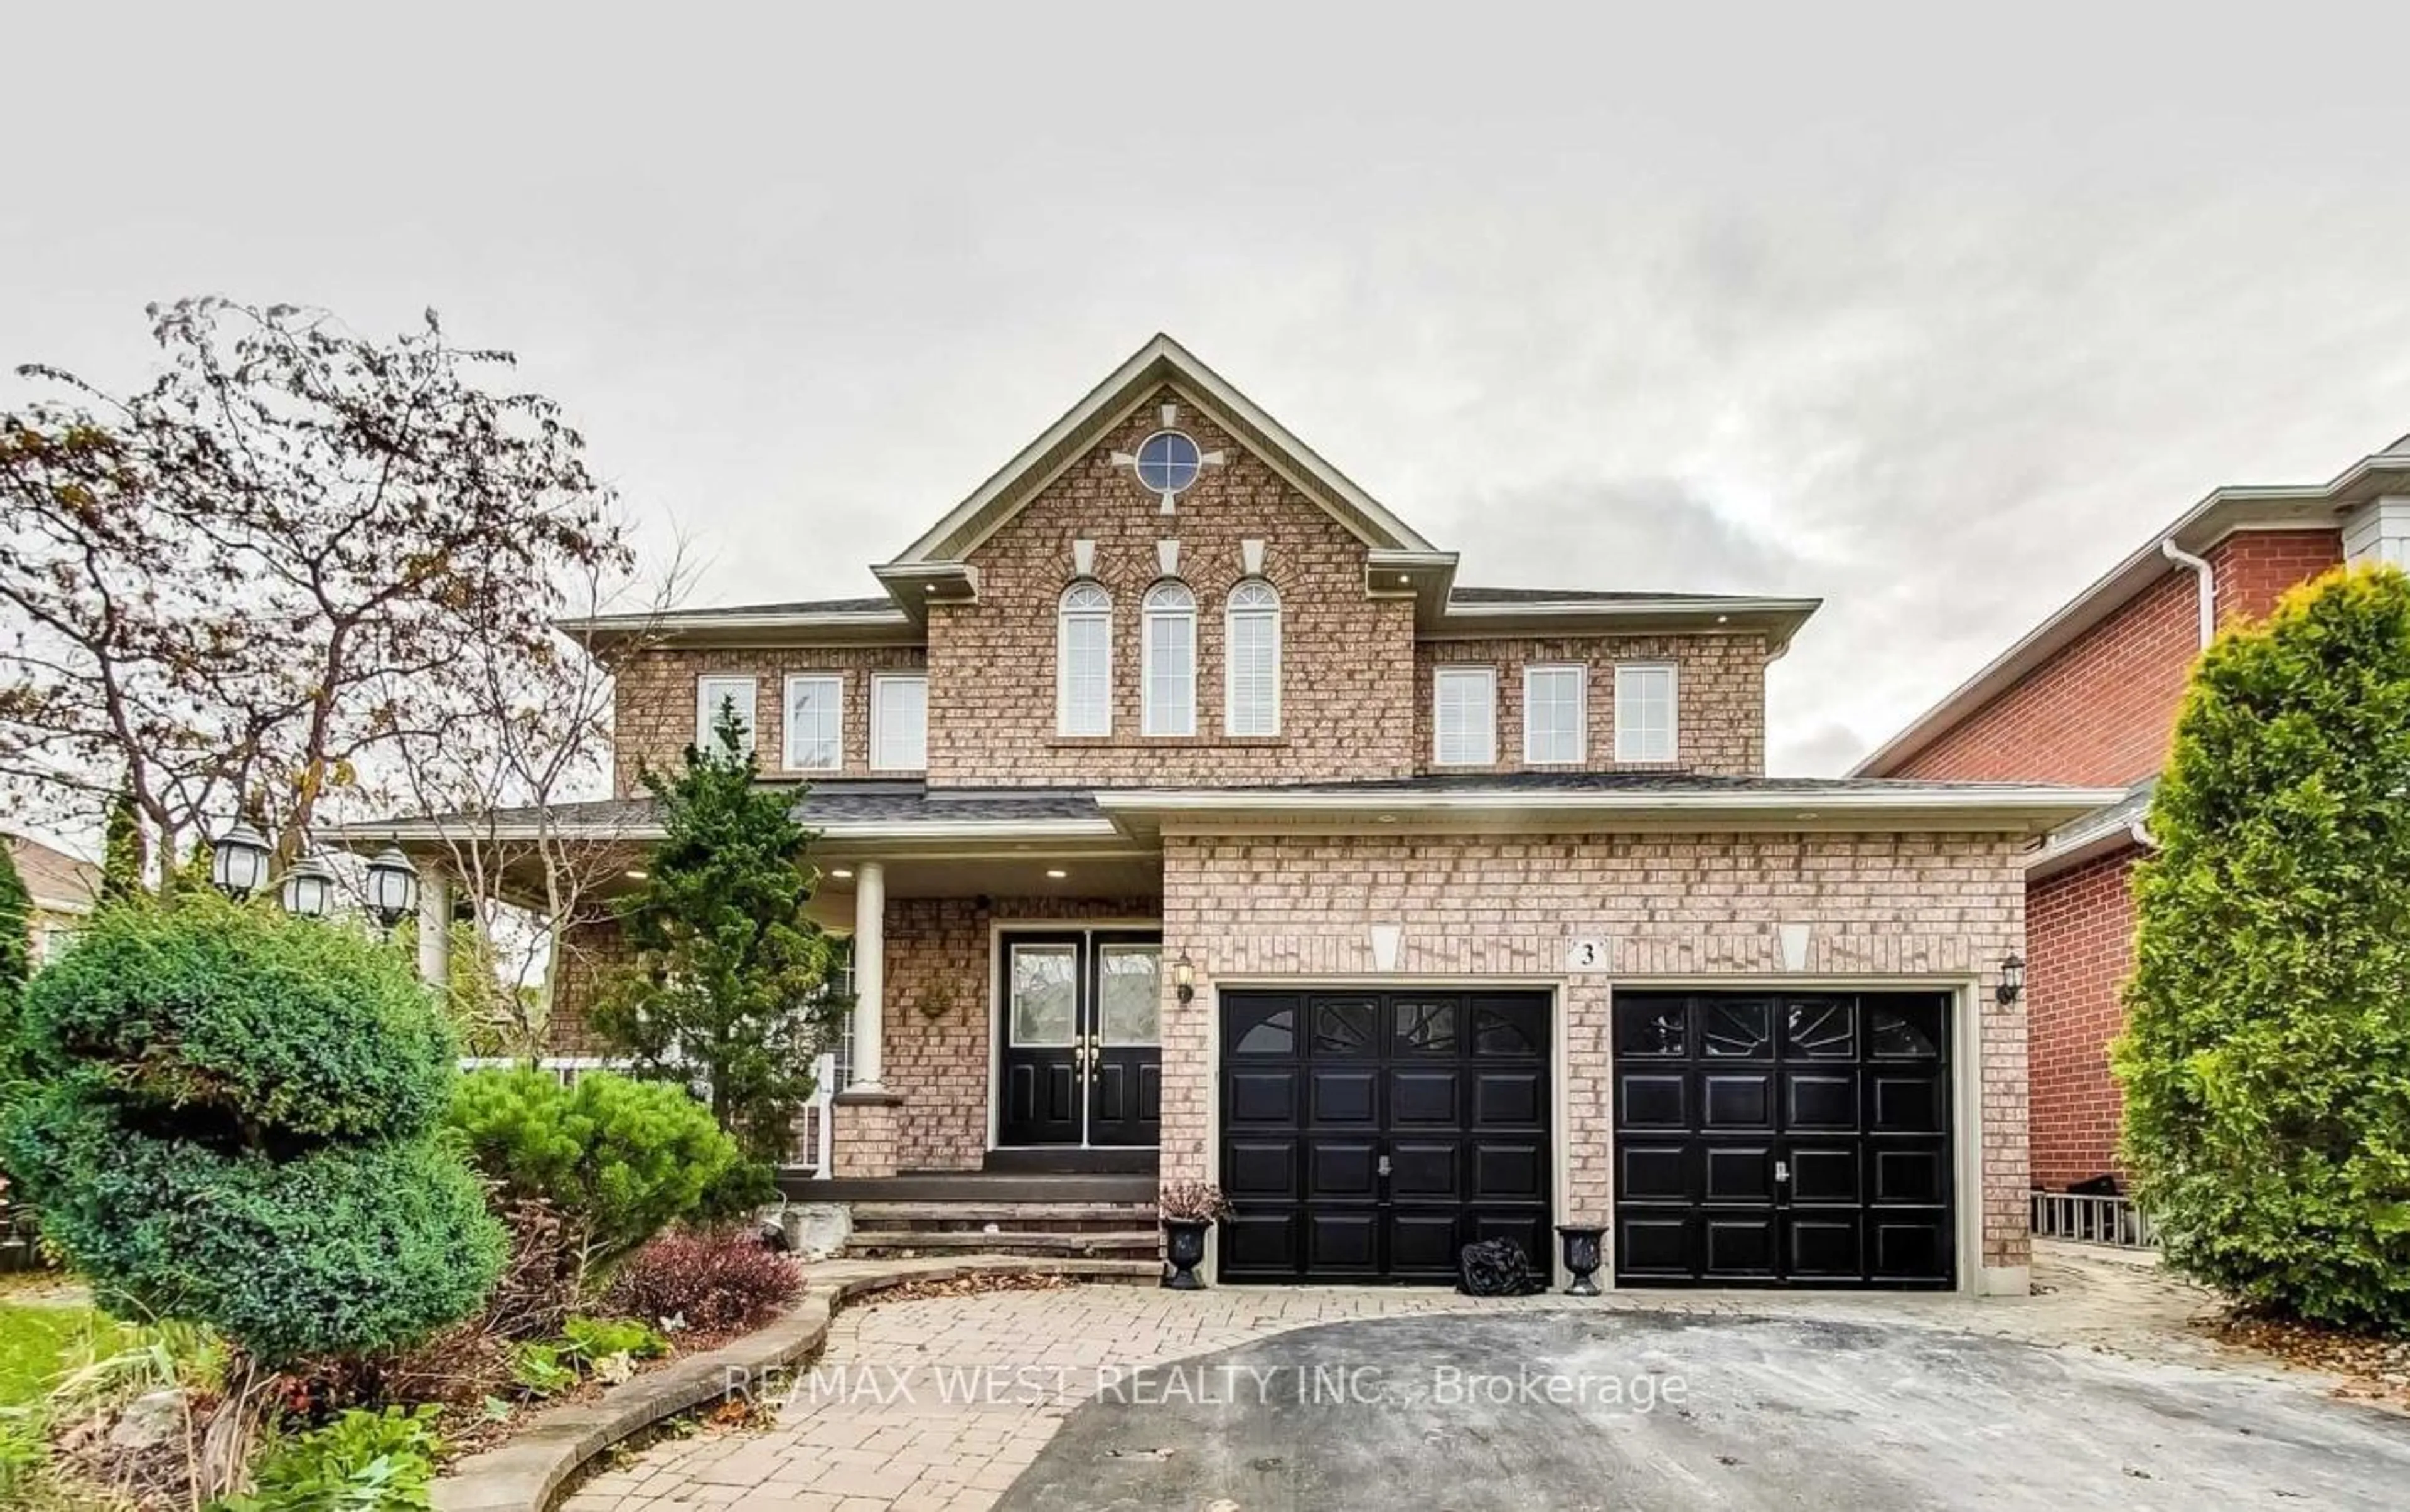 Home with brick exterior material for 3 Branstone Dr, Whitby Ontario L1R 3B6